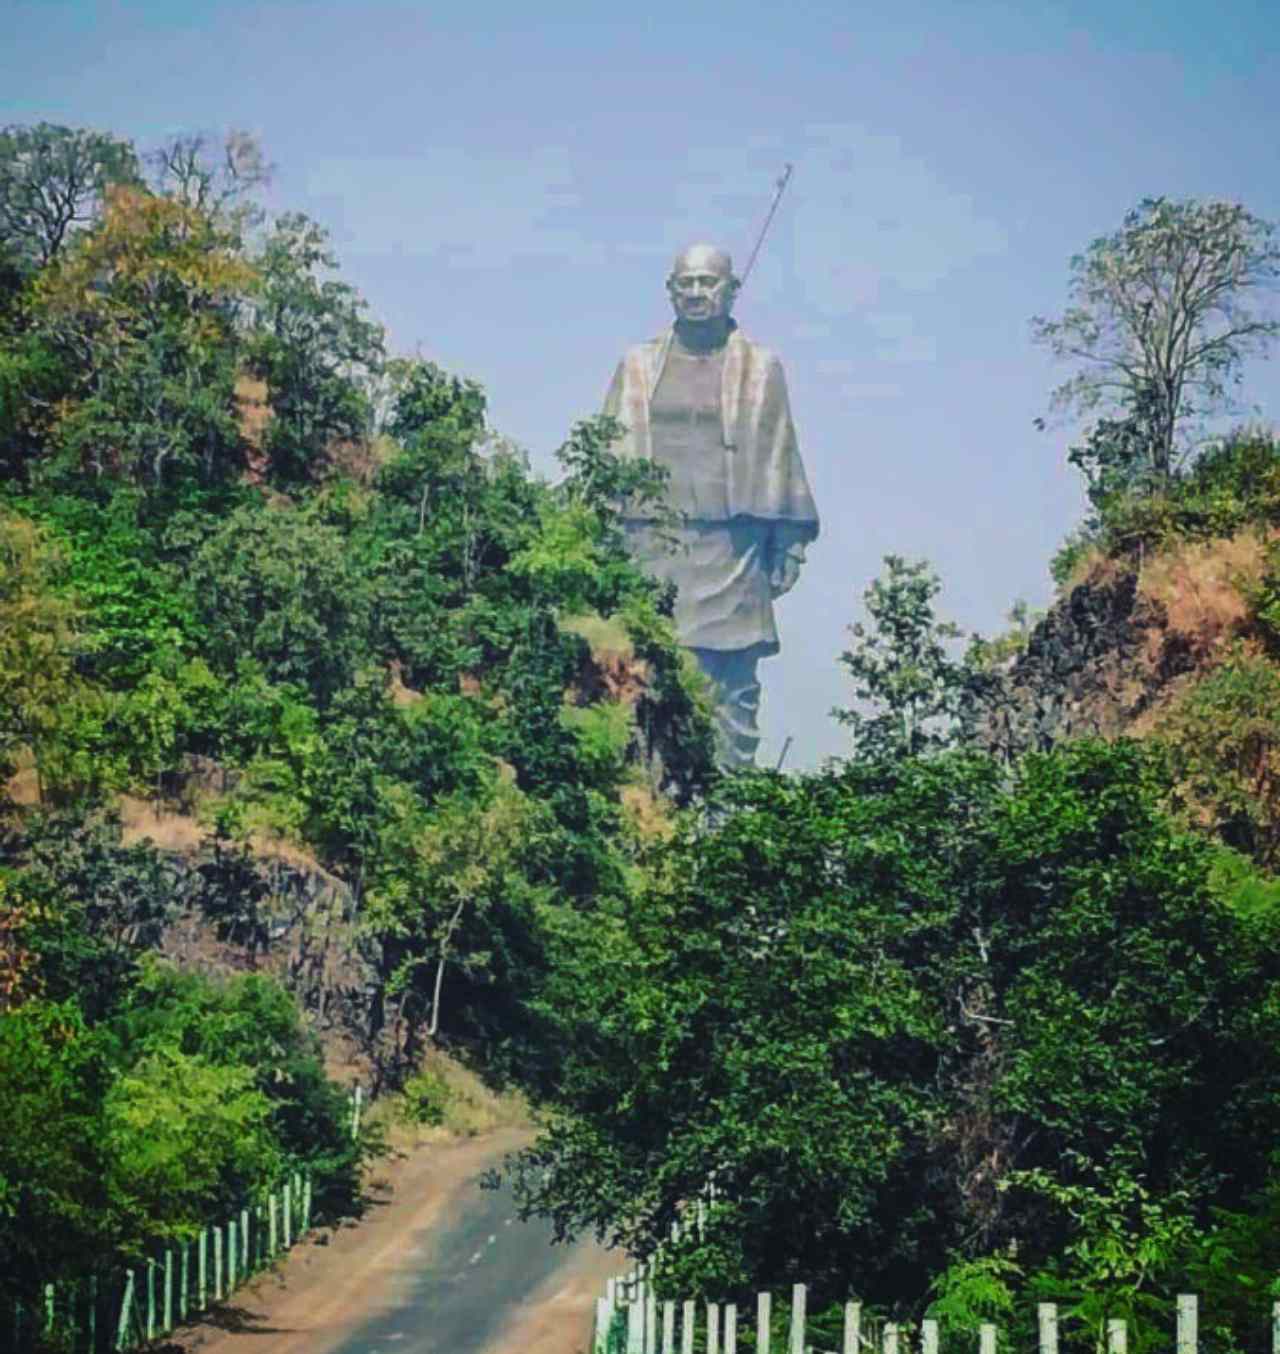 The ‘Statue of Unity’ constructed as a tribute to Sardar Vallabhbhai Patel will be inaugurated by Prime Minister Narendra Modi on October 31. Situated on Sadhu Bet island on Narmada river 200 km from Ahmedabad, the memorial has been constructed as a reminder of India's freedom struggle and Patel's visionary ideologies of unity, patriotism, inclusive growth and good governance. Here are some facts about the world's tallest statue. (Image: InfoGujarat)